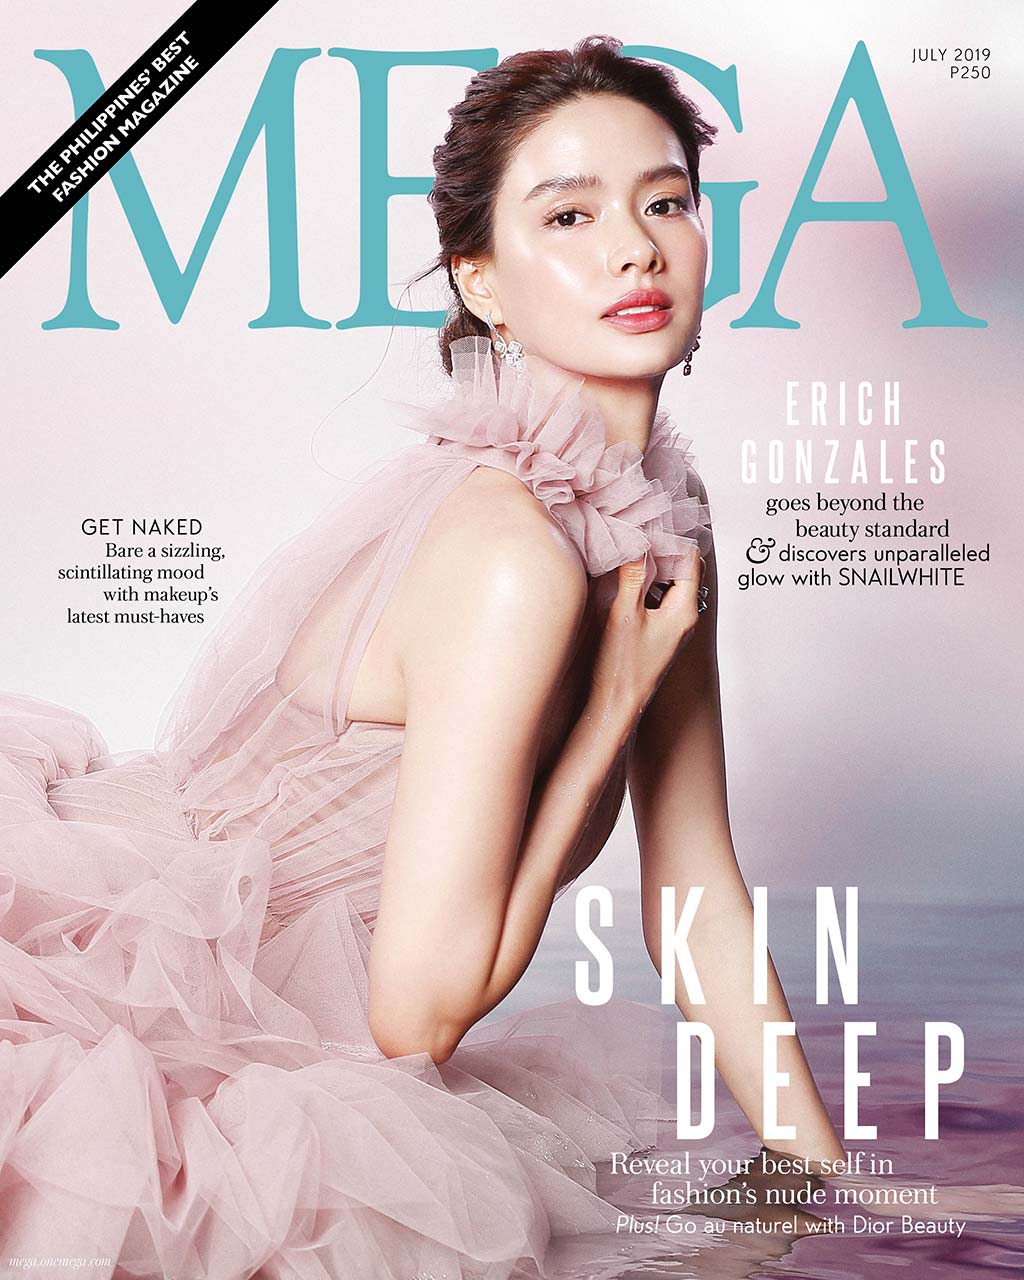 Erich Gonzales on MEGA July 2019 cover